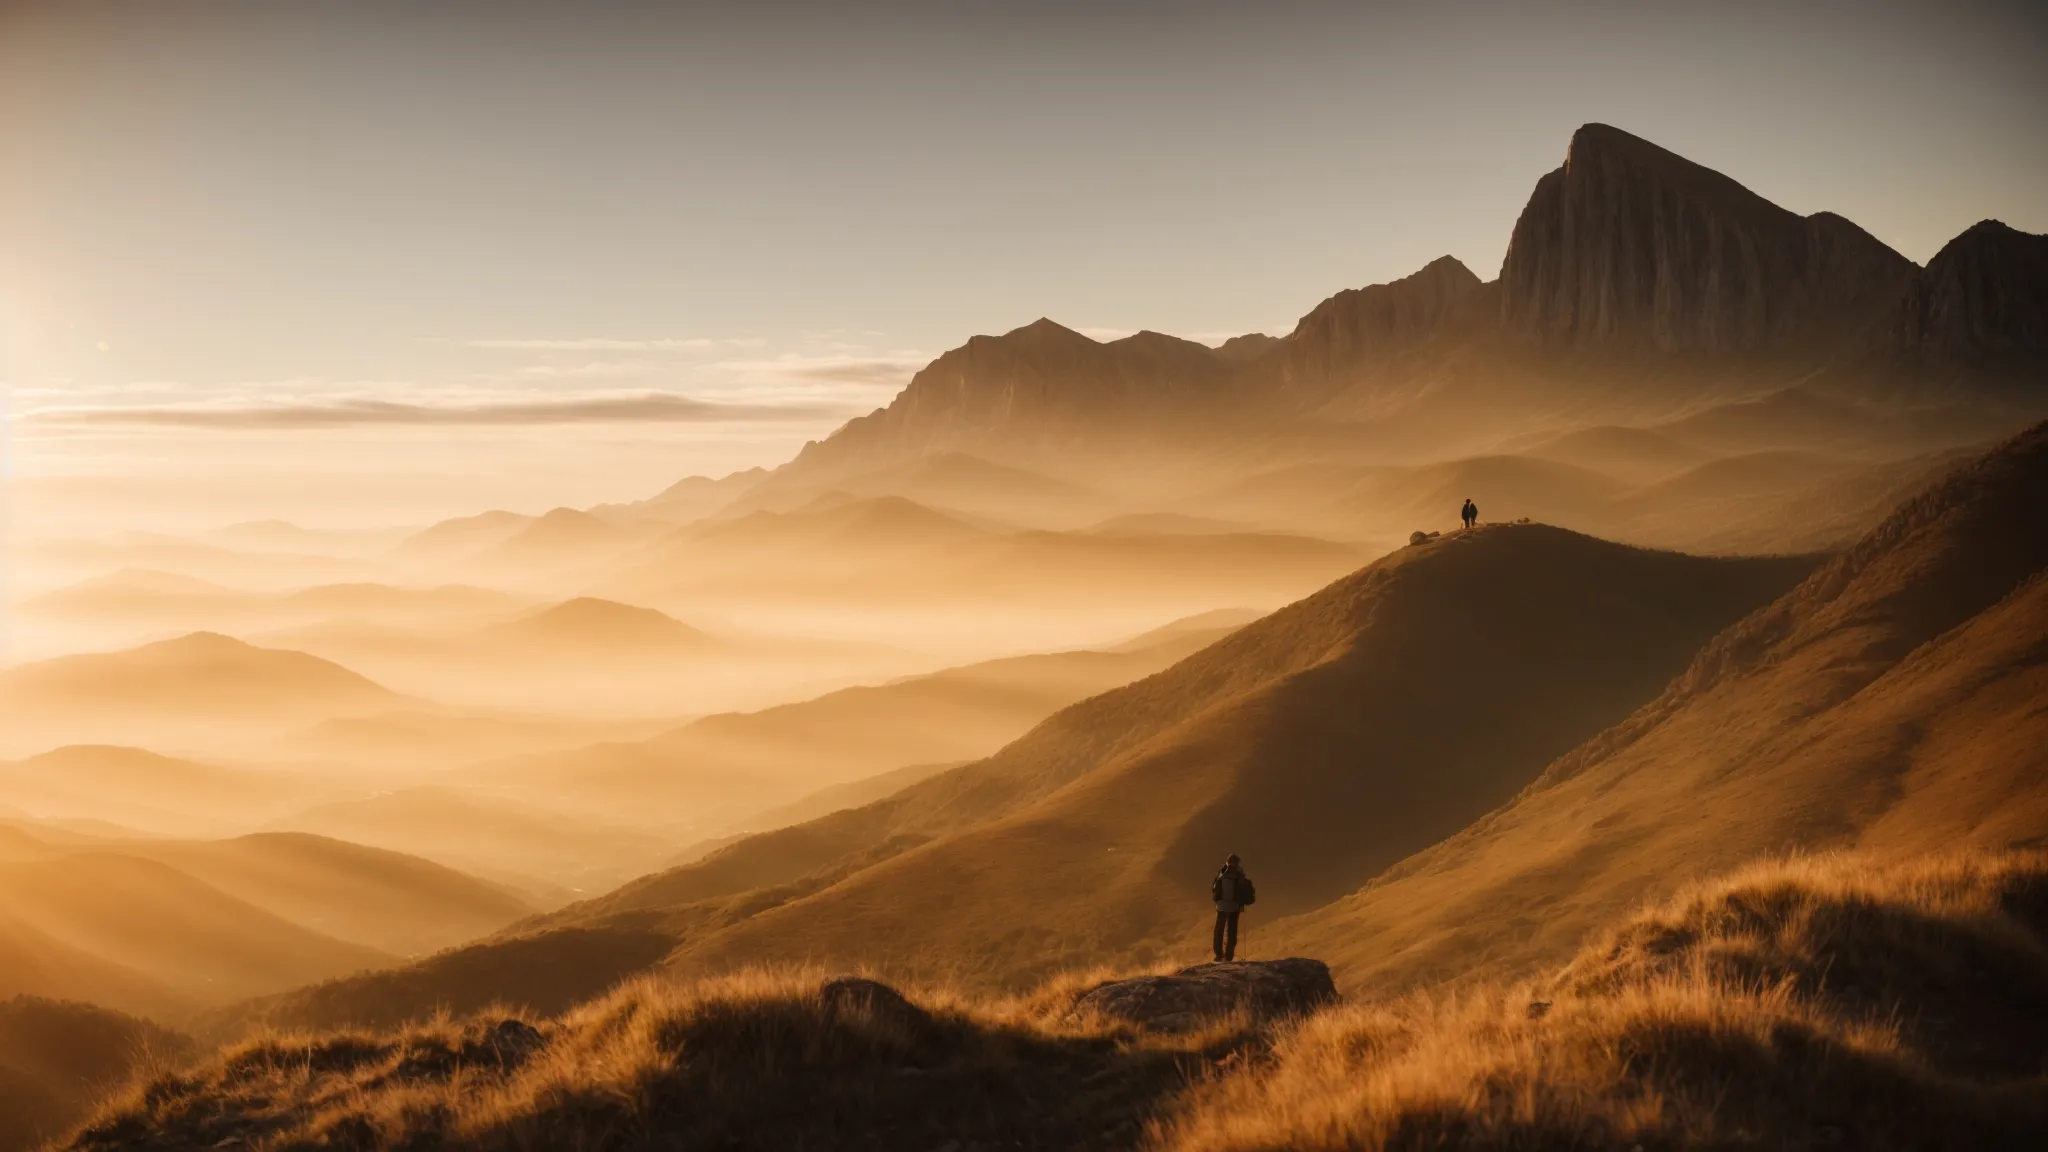 a person stands at the peak of a mountain, overlooking a vast landscape bathed in the golden light of sunrise.